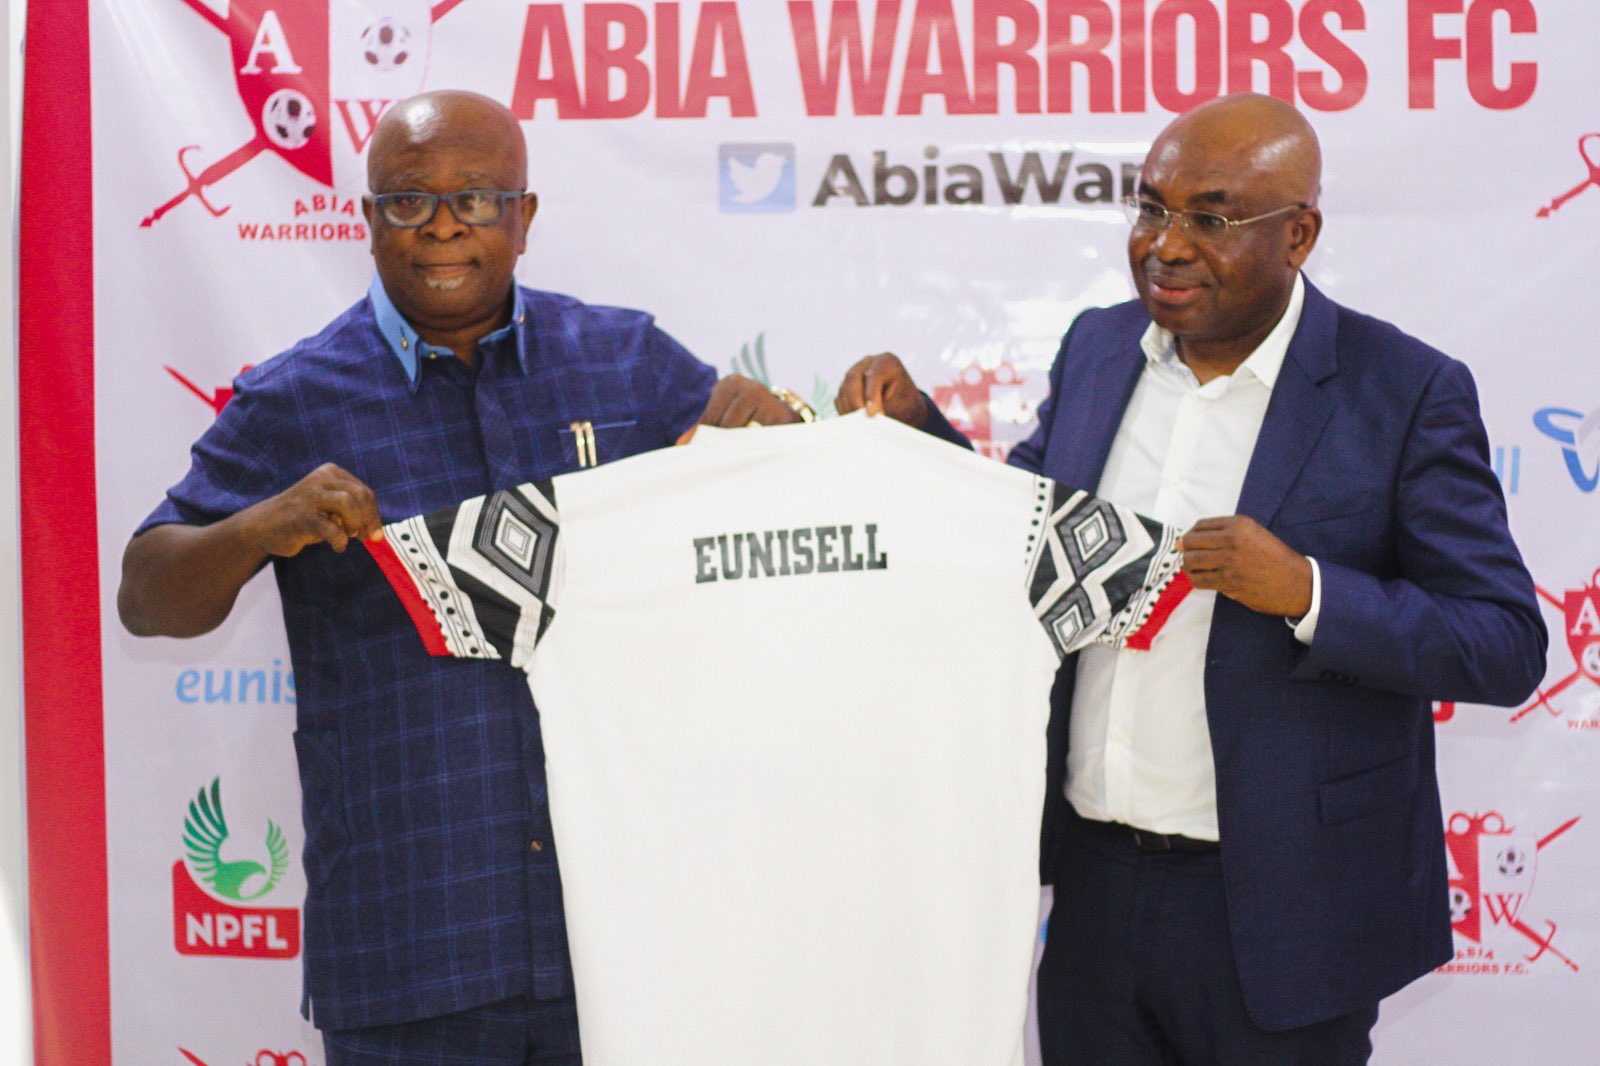 NPFL 24 - Eunisell to partner Abia Warriors in social responsibility drive